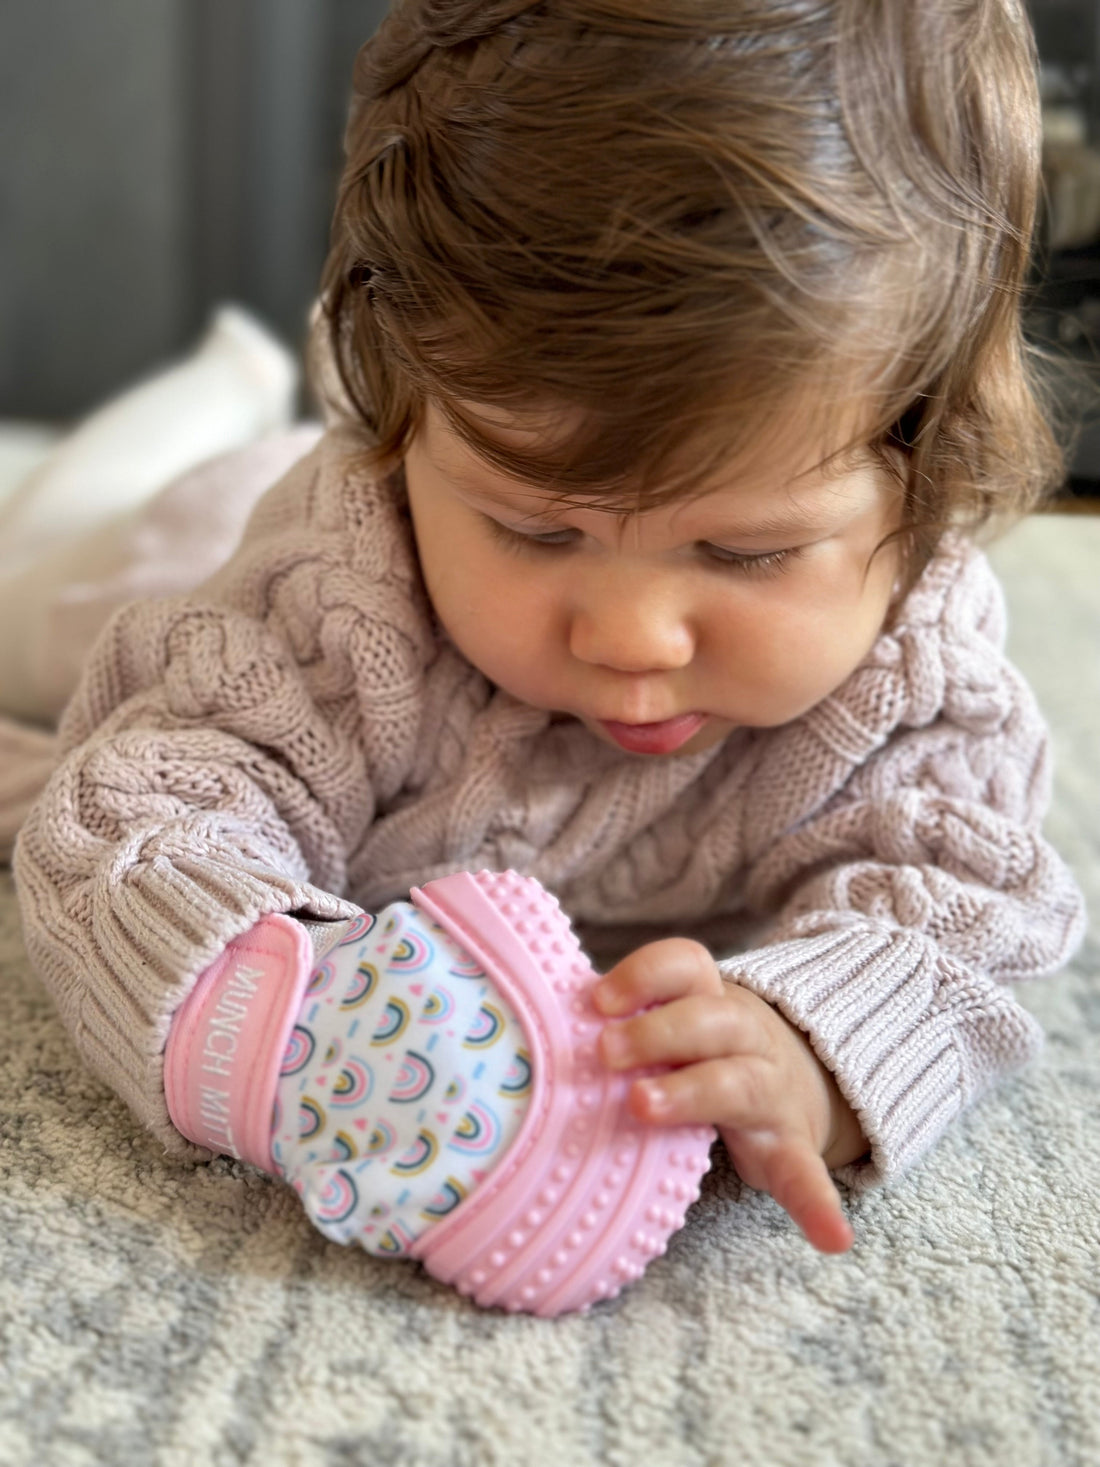 Why Malarkey Kids Products Are the Perfect Easter Gift for Baby